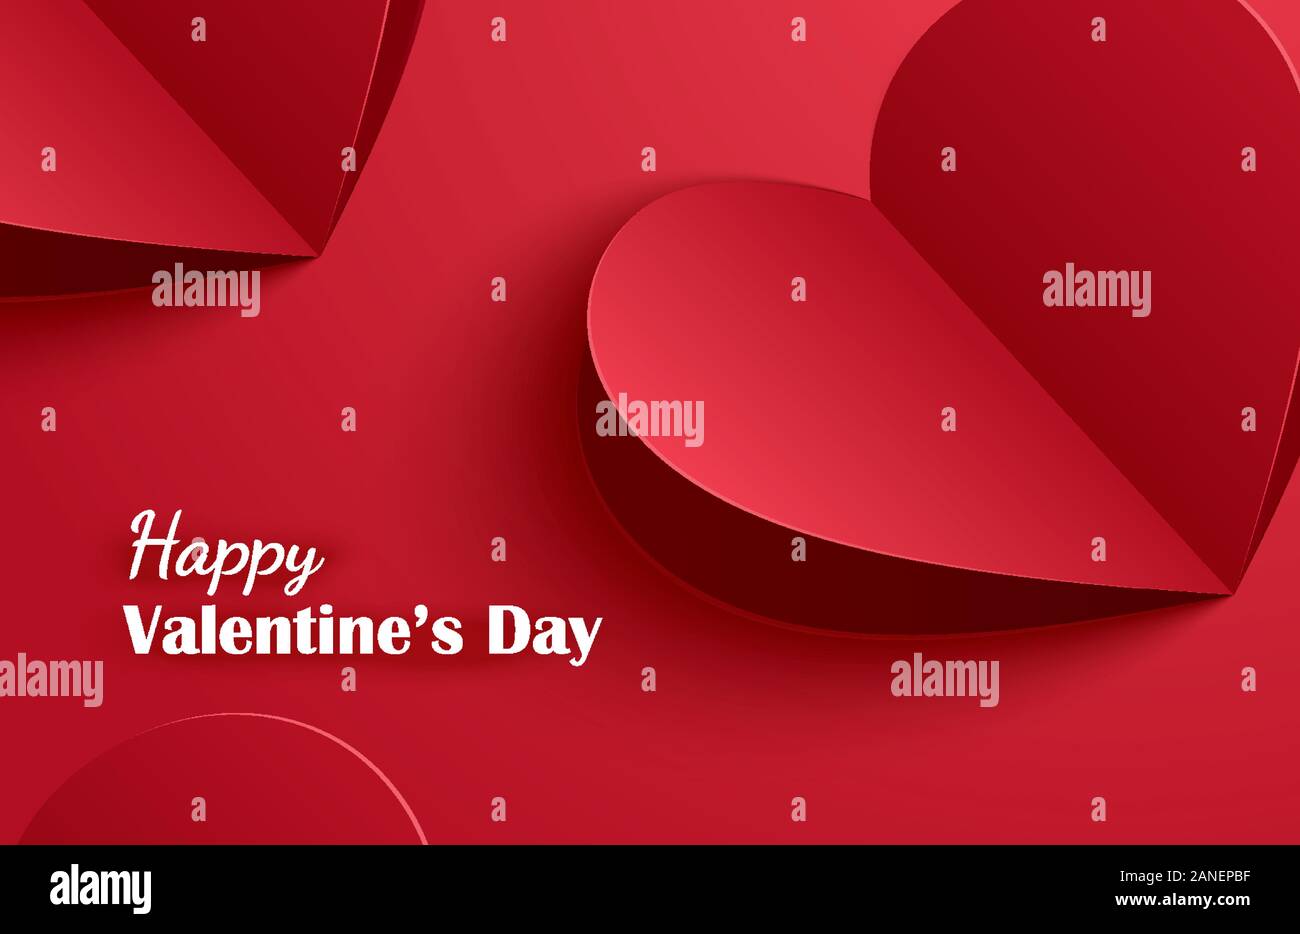 Valentine day greeting card cut out paper hearts vector image on VectorStock  Hearts paper crafts, Valentines day greetings, Valentine's day greeting  cards, Paper Hearts Cut Outs 